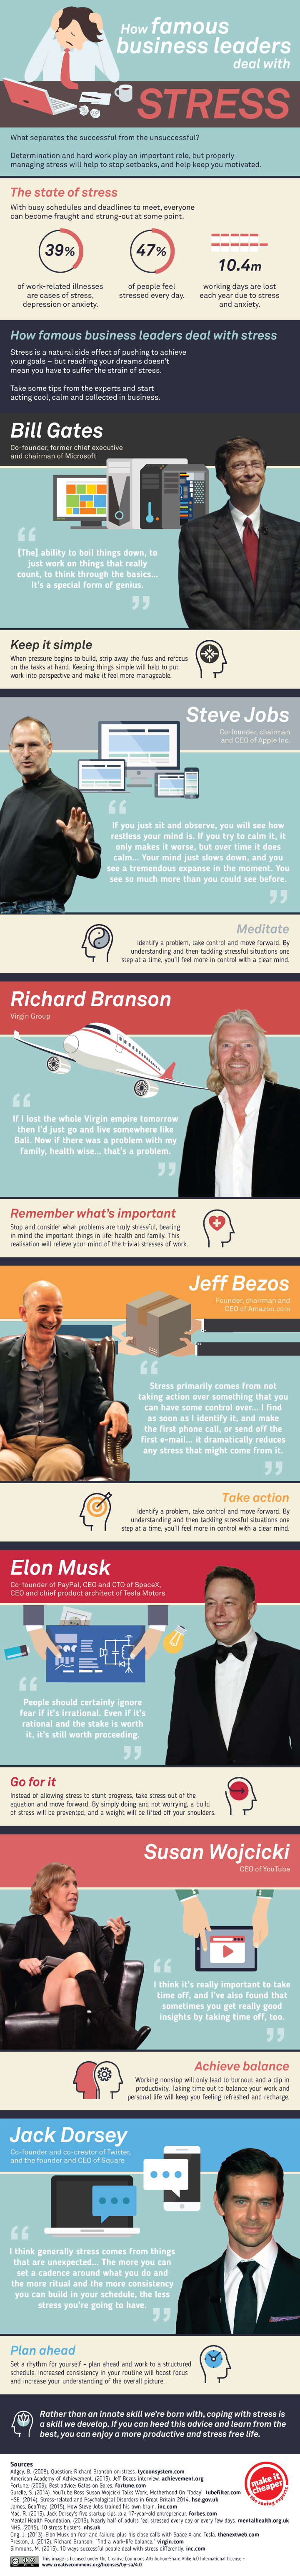 How Famous Business Leaders Deal With Stress